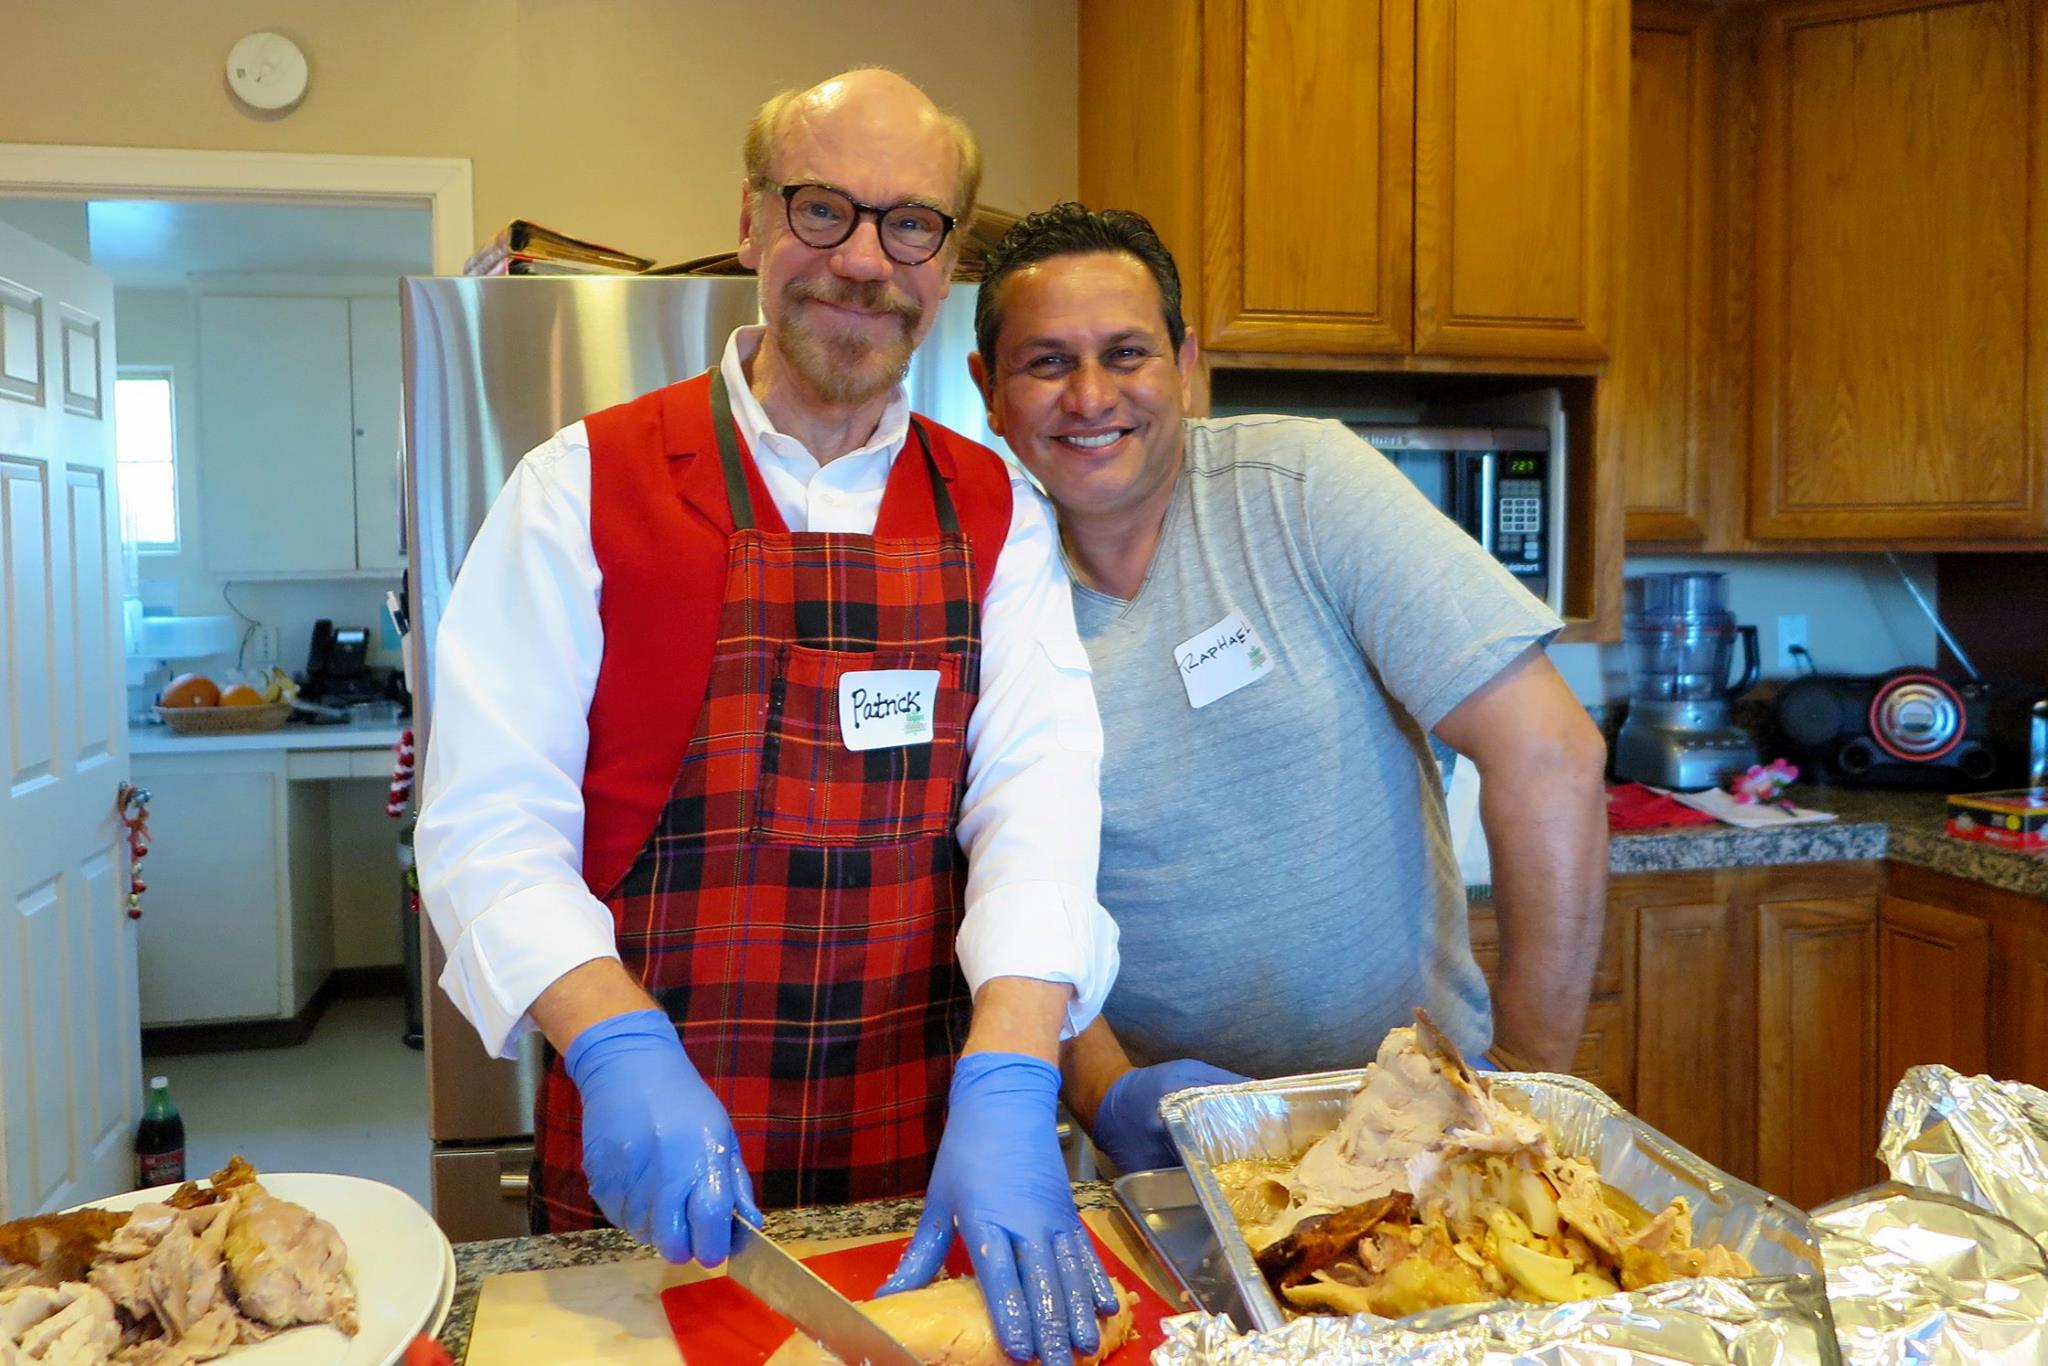 Bring & Serve Dinner at Fraternity House for AIDS/HIV Patients